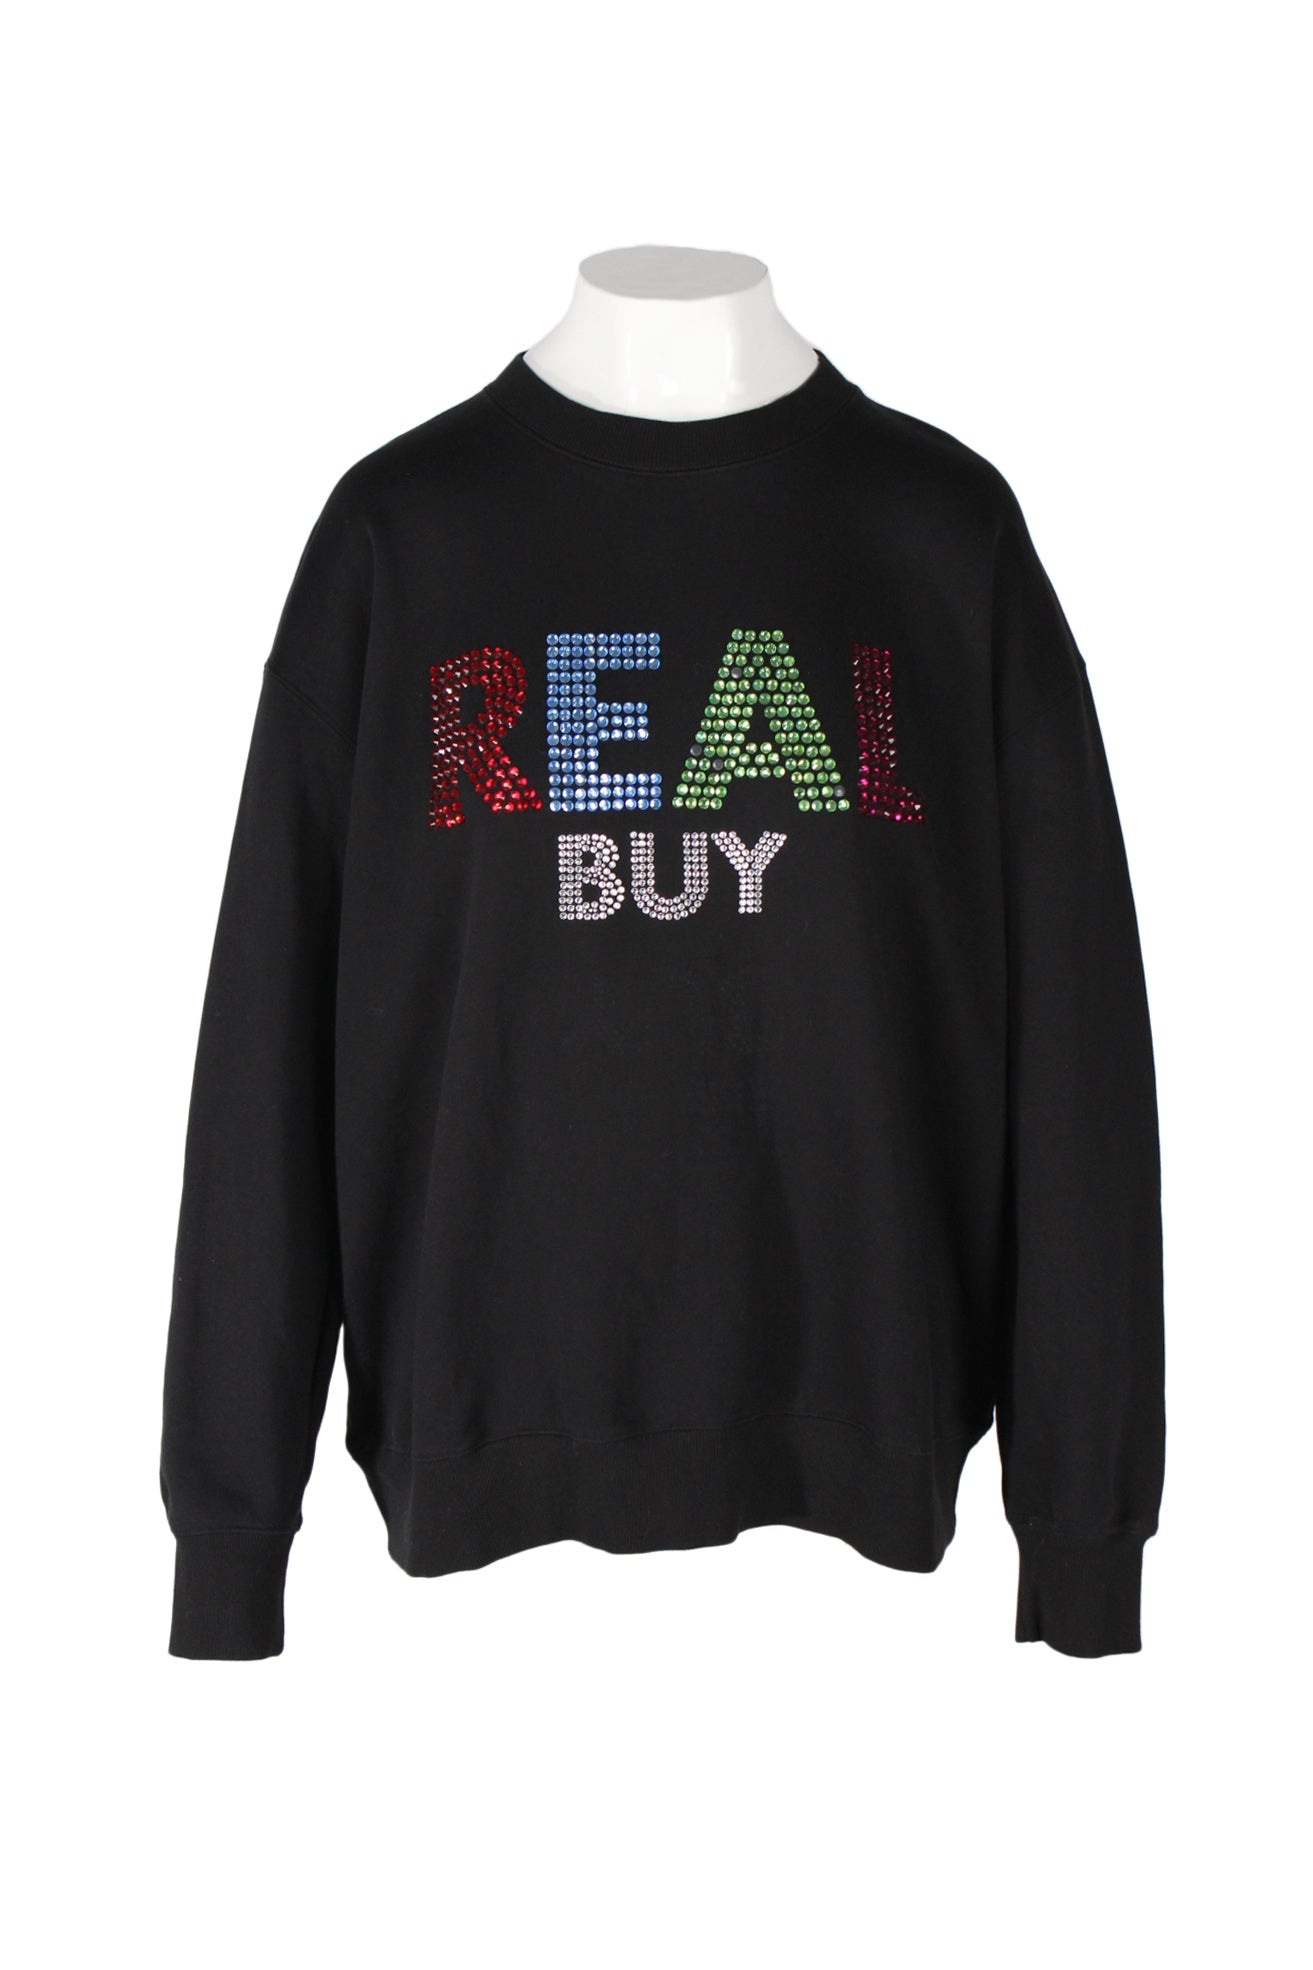 front angle real buy black long sleeve pullover cotton sweatshirt on feminine mannequin bust with multicolor 'real buy' rhinestone lettering at chest and rib knit crew collar, cuff, waistband.